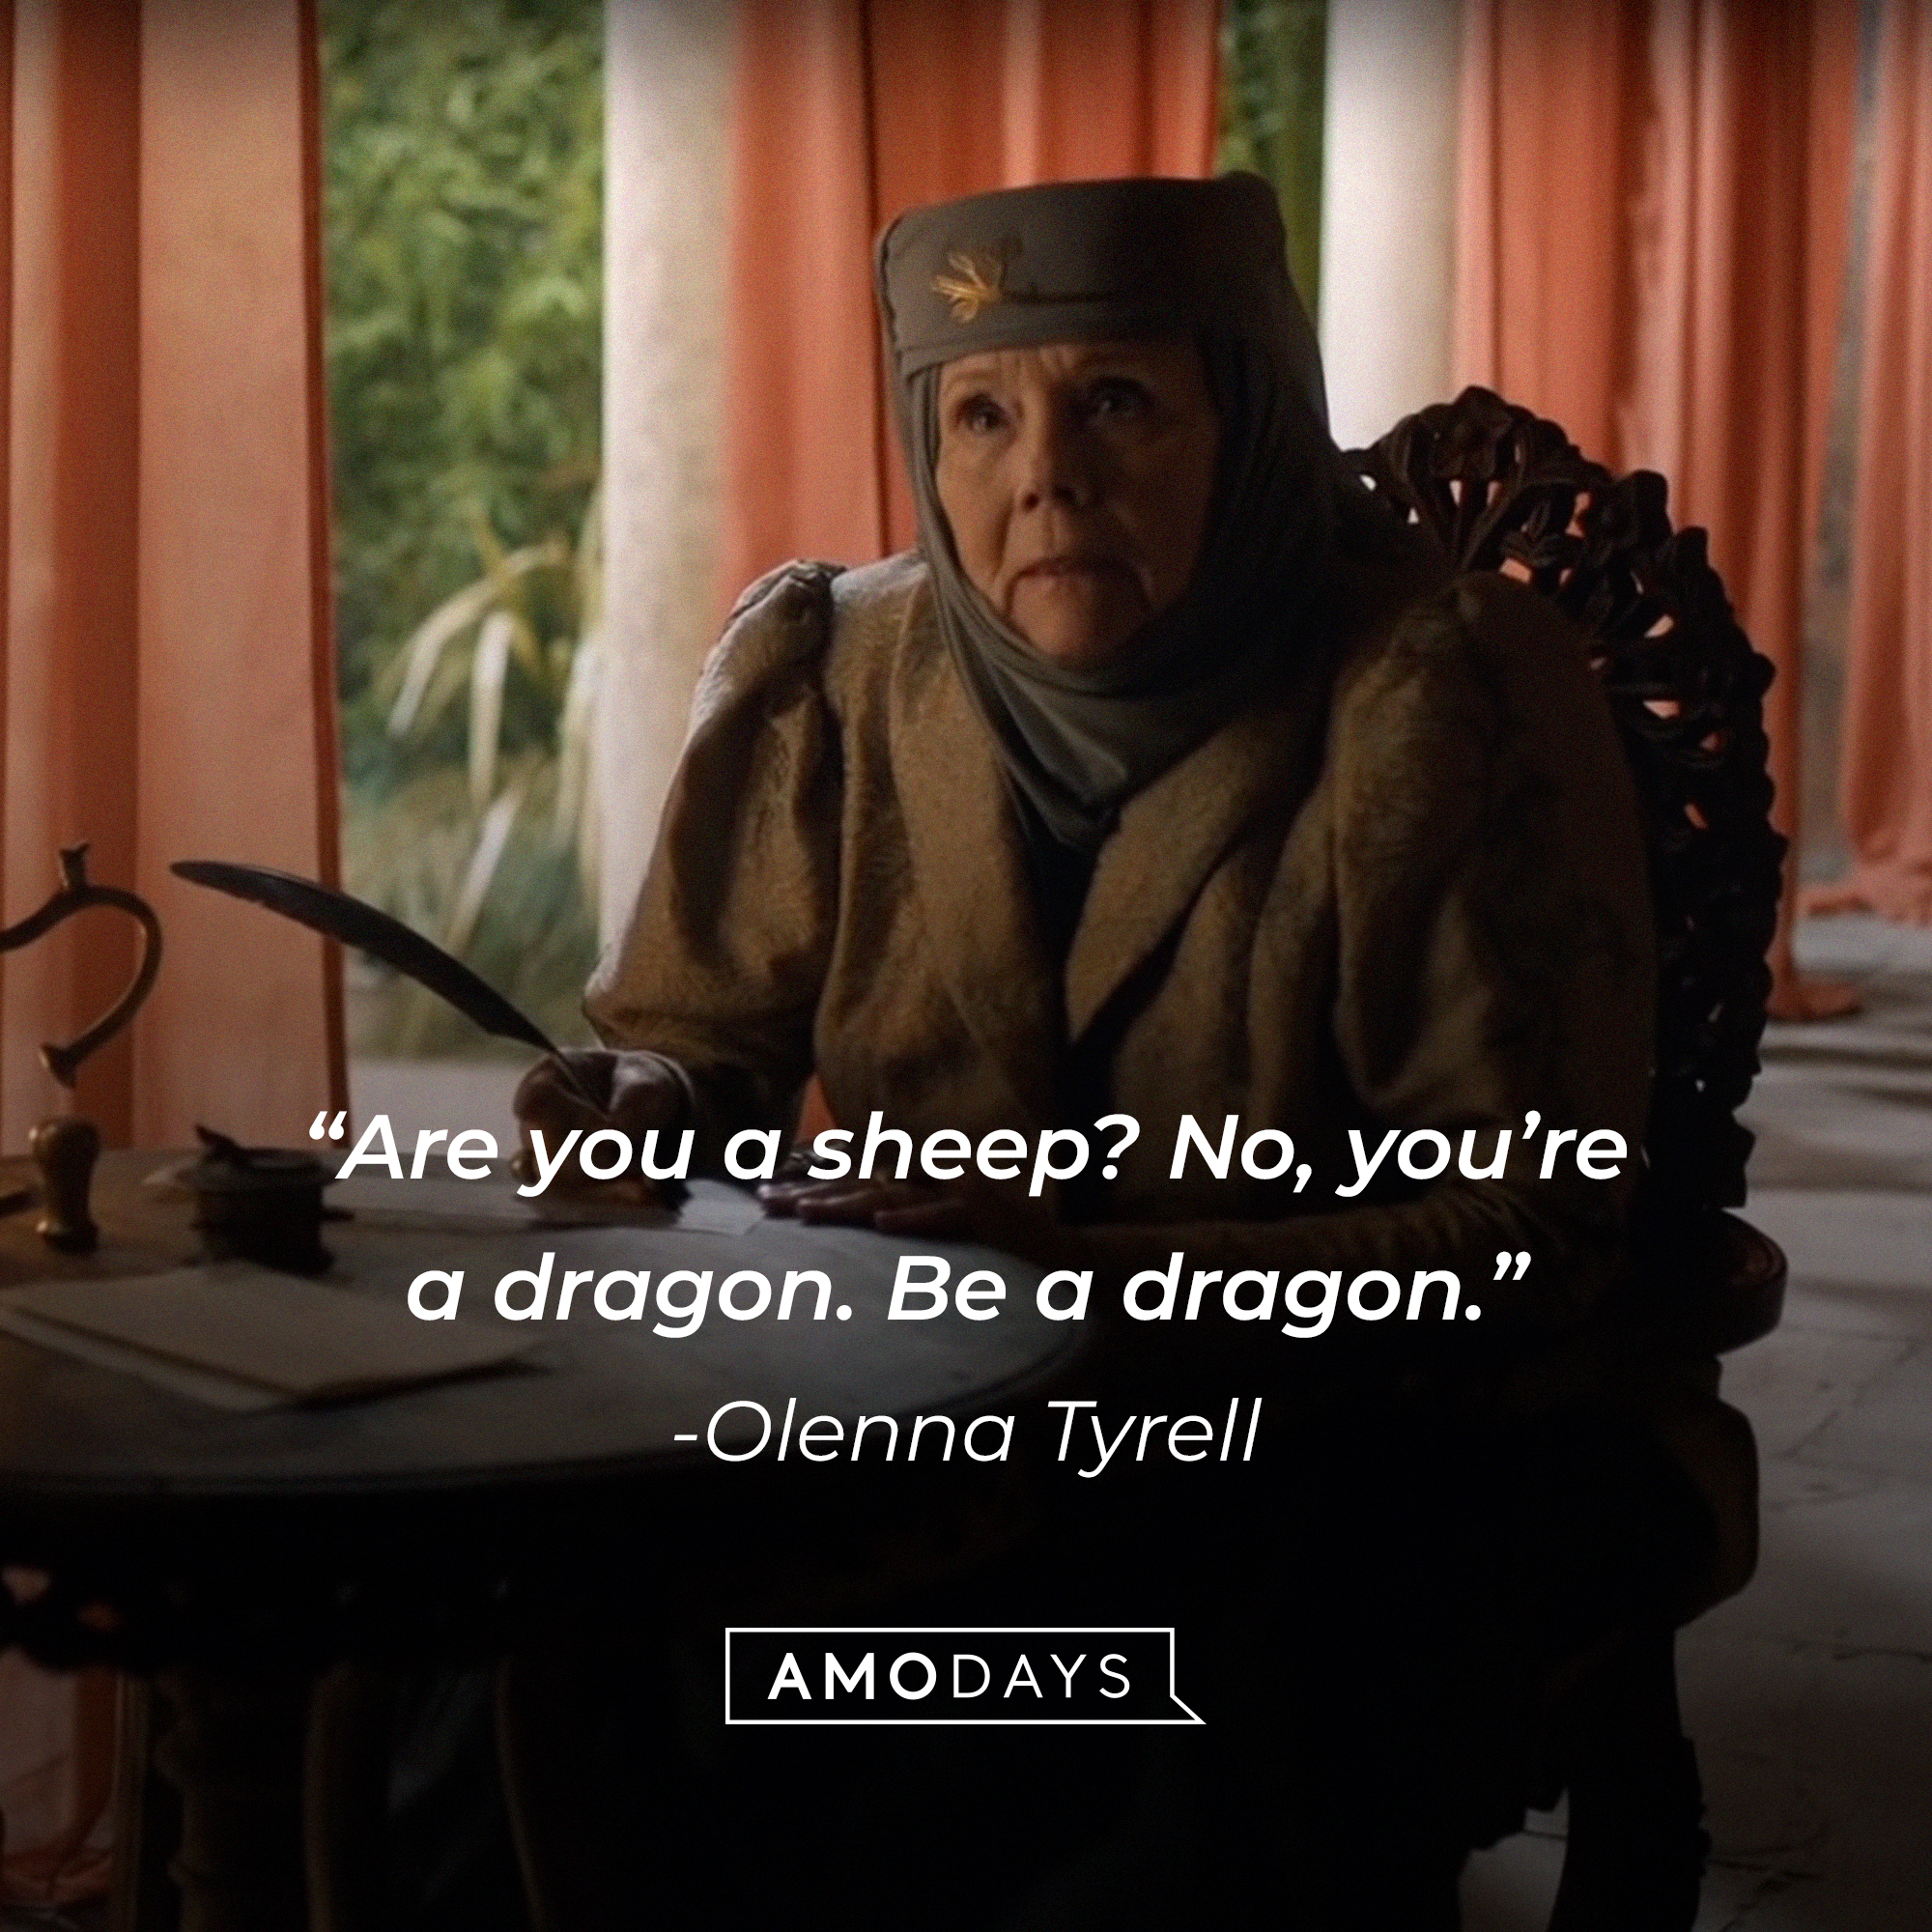 Olenna Tyrell, with her quote: “Are you a sheep? No, you’re a dragon. Be a dragon."│Source:  facebook.com/GameOfThrones